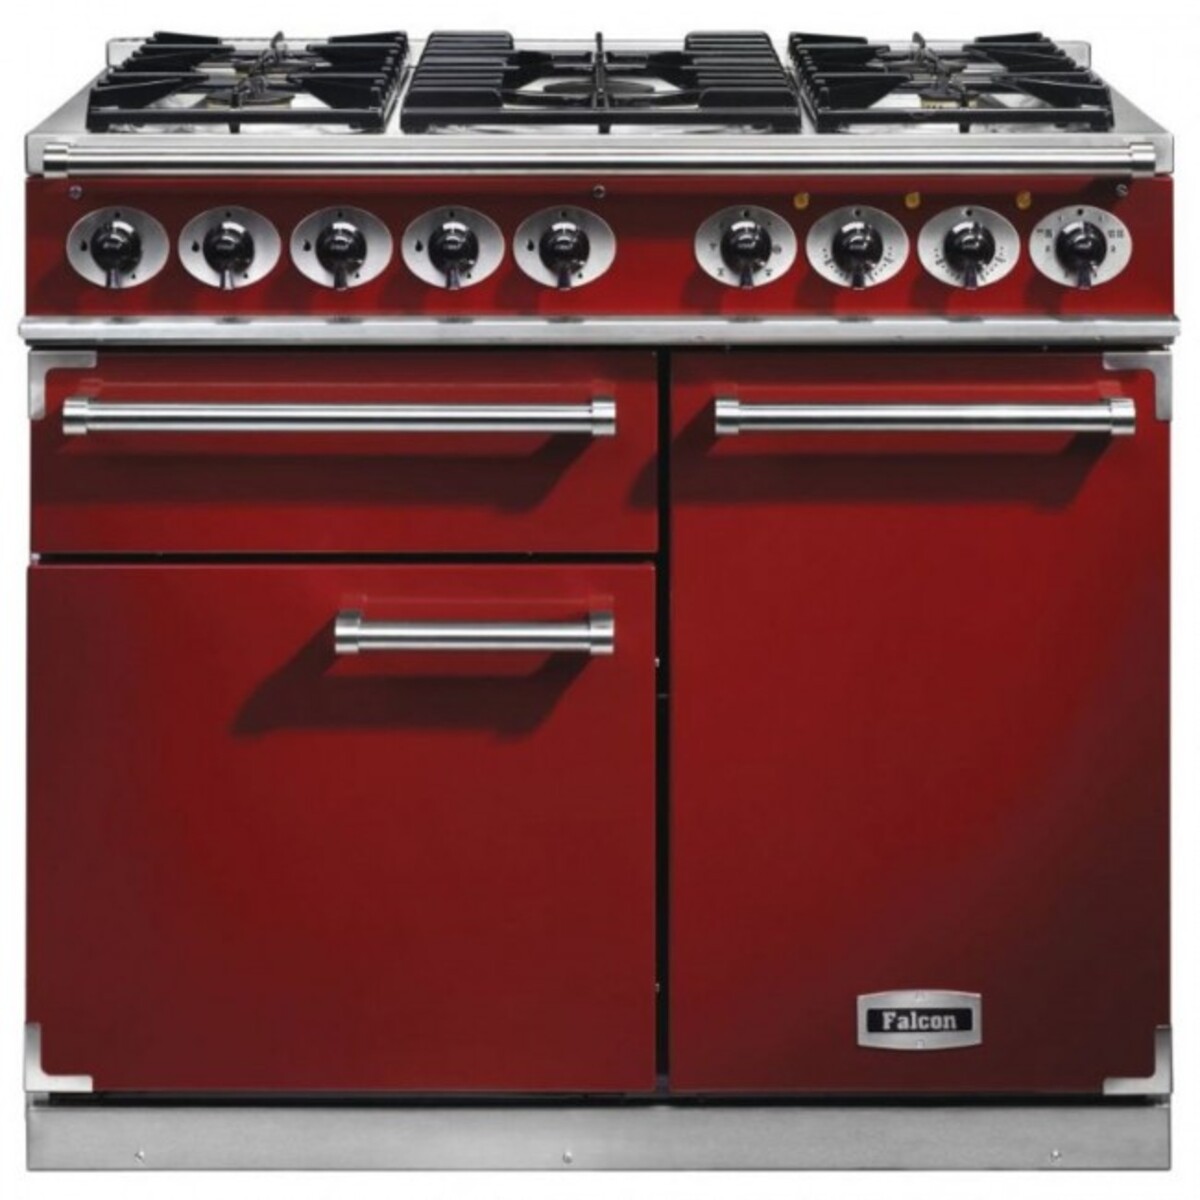 FALCON 98500 (F1000DXDFRD/NM) 100cm Deluxe Range Cooker, Red Finish